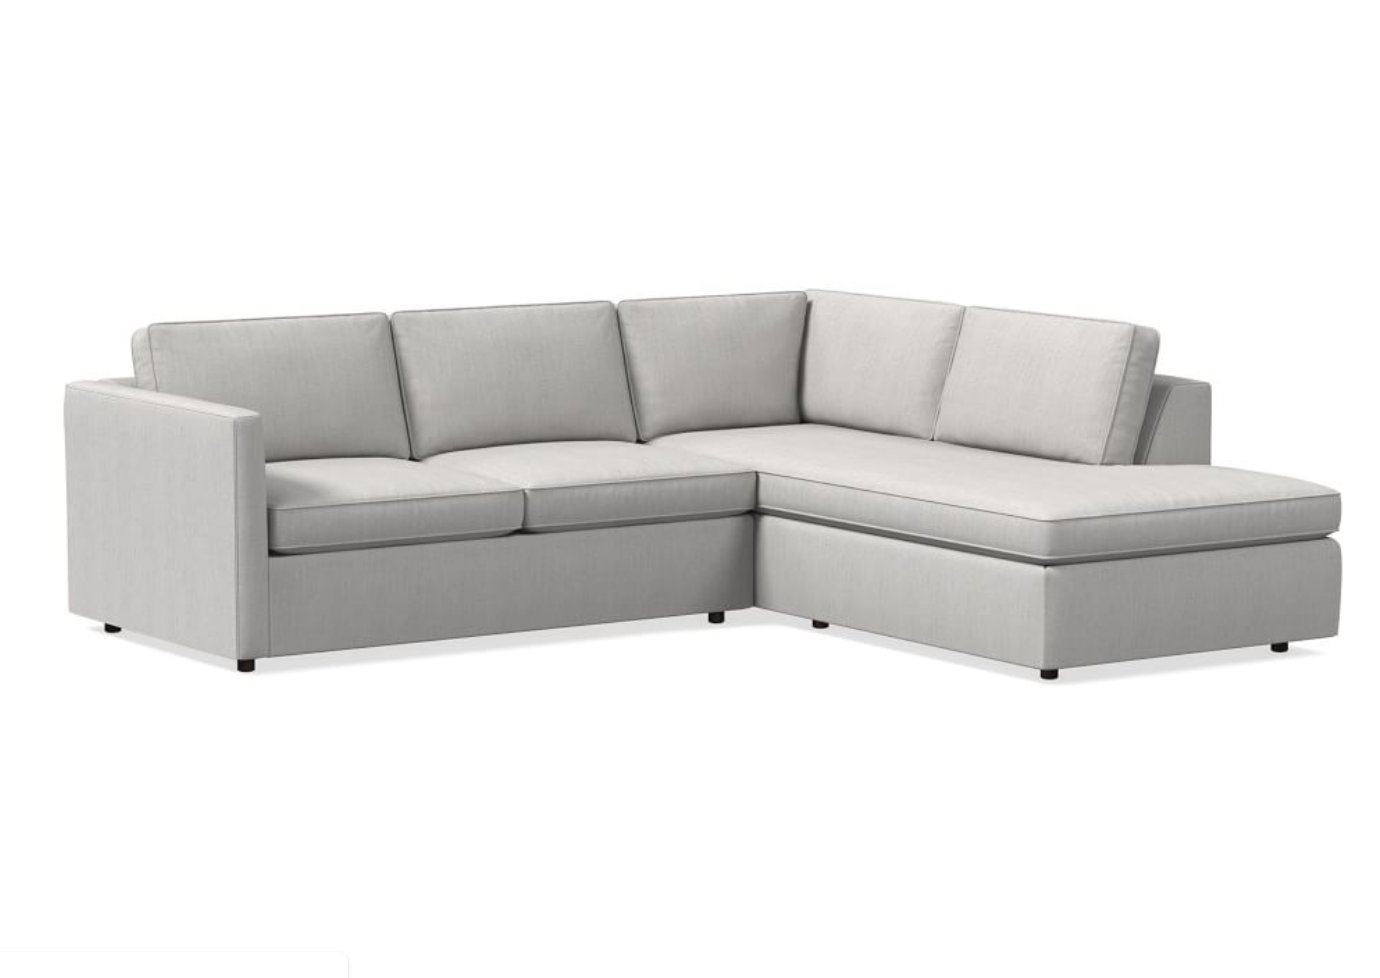 Harris 104" Right Multi Seat 2-Piece Bumper Chaise Sectional, Standard Depth, Yarn Dyed Linen Weave, Frost Gray - Image 0